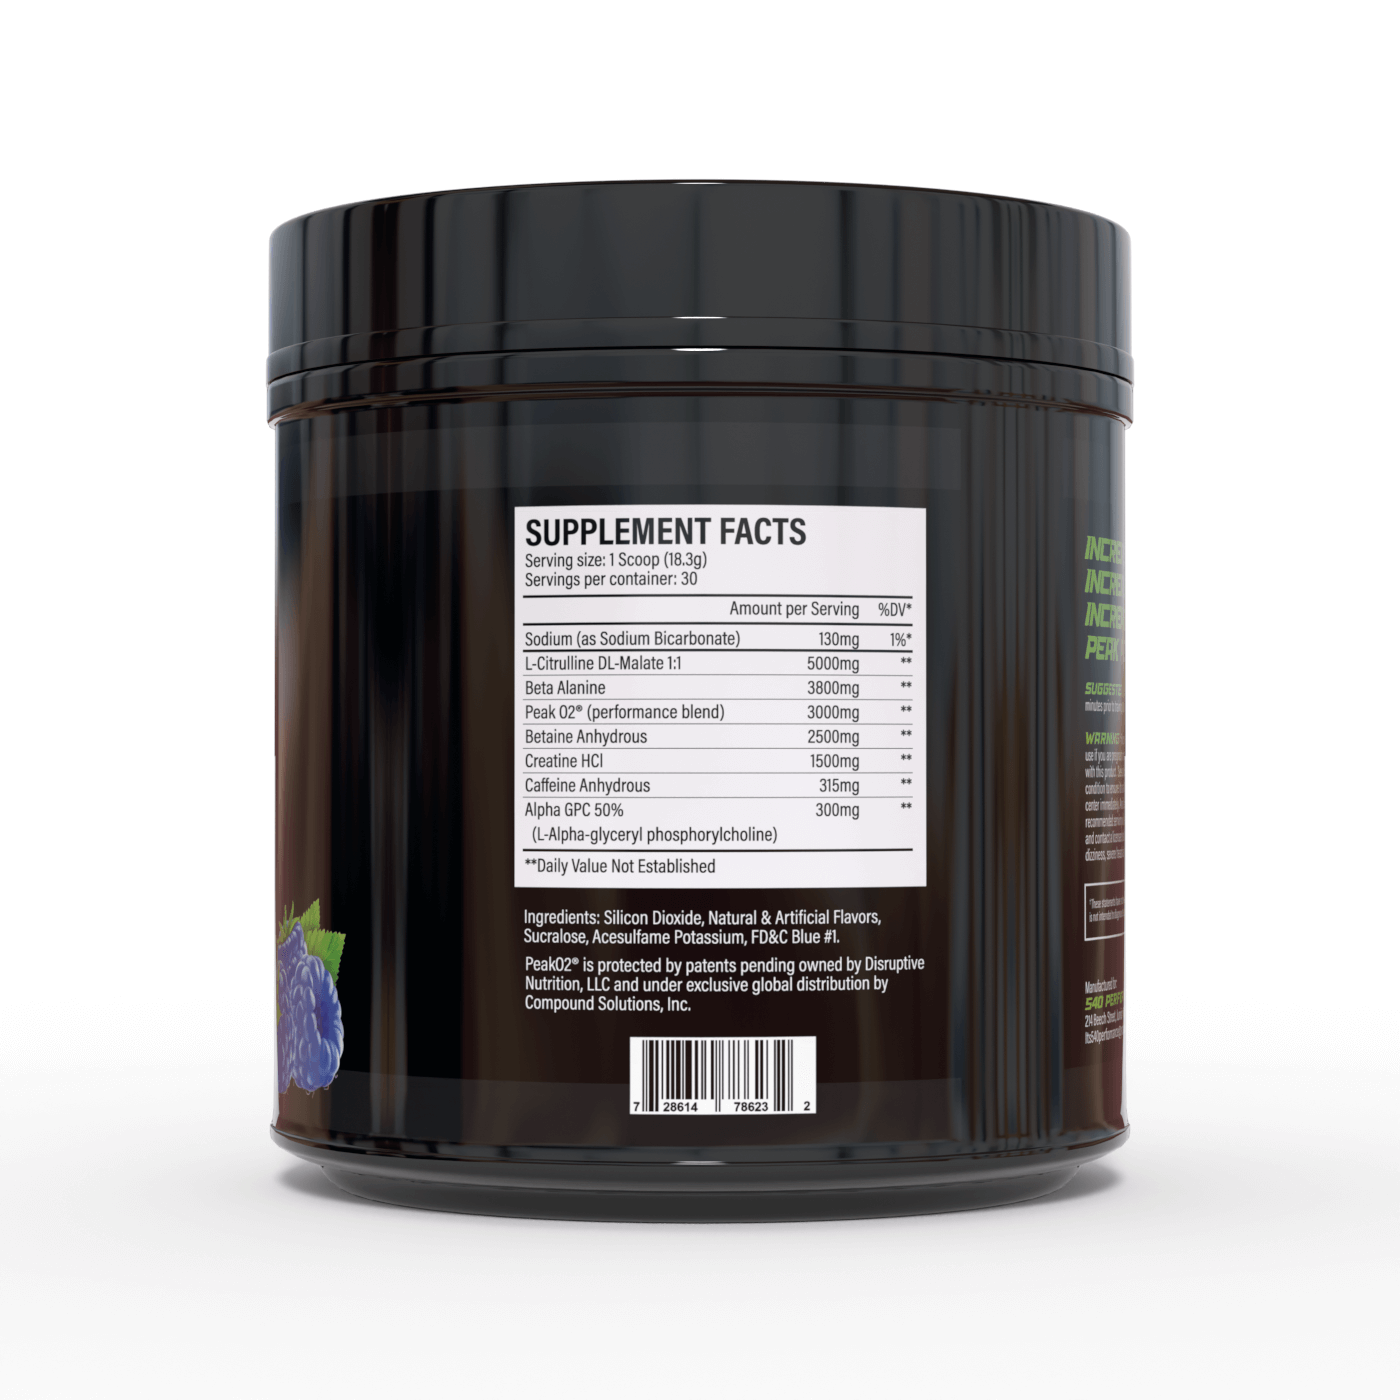 Black container 540 pre-workout supplement facts